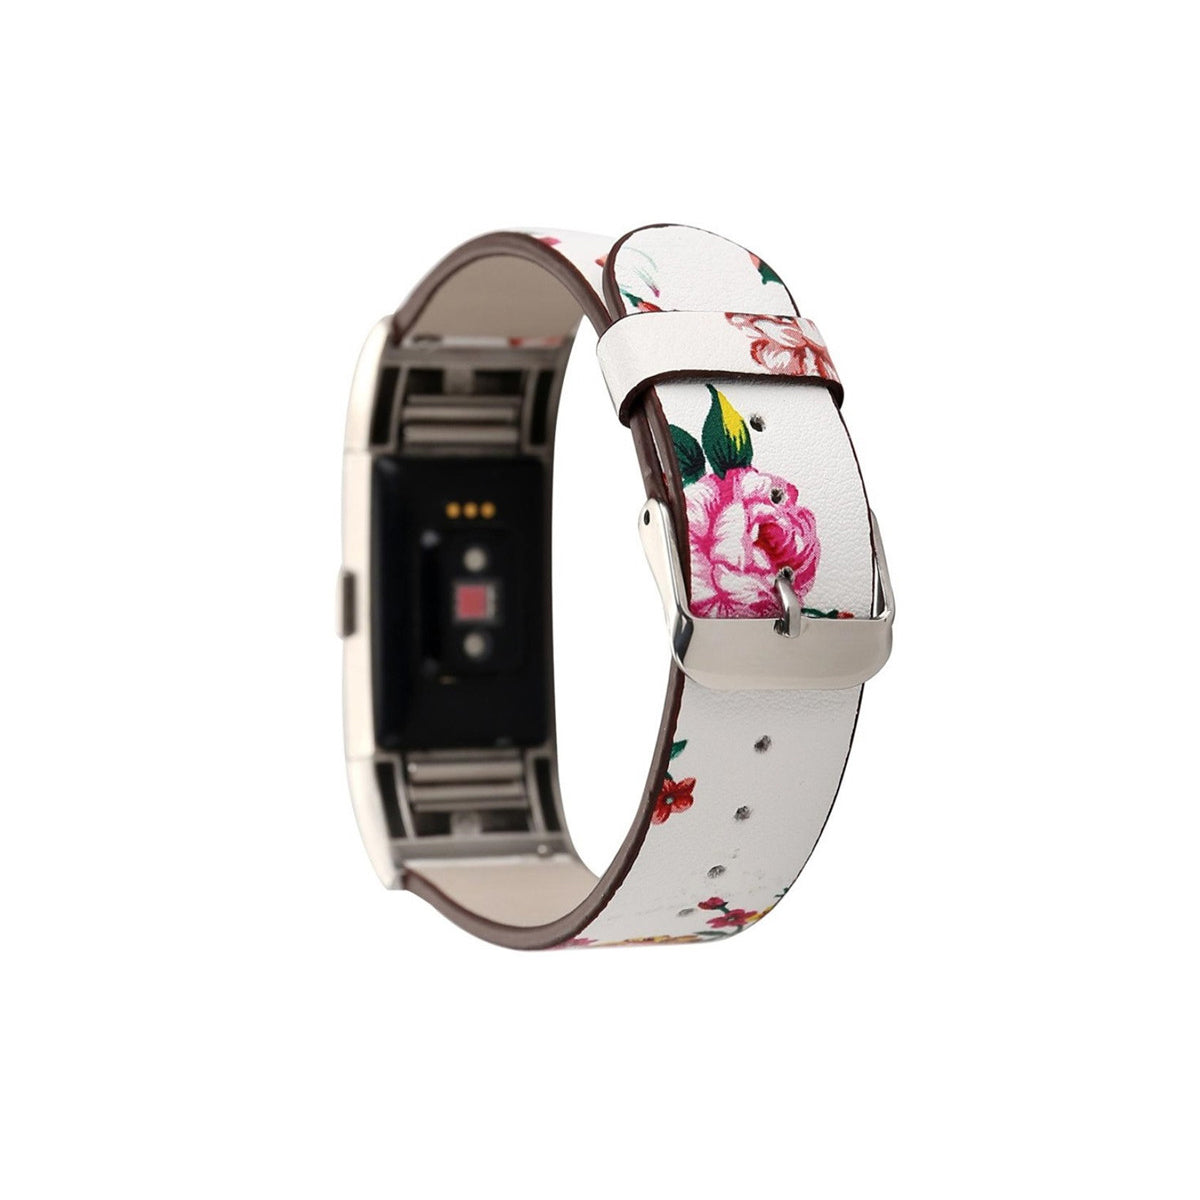 Designer Leather Fitbit Charge 2 Replacement Band with Buckle White + Red Flowers  